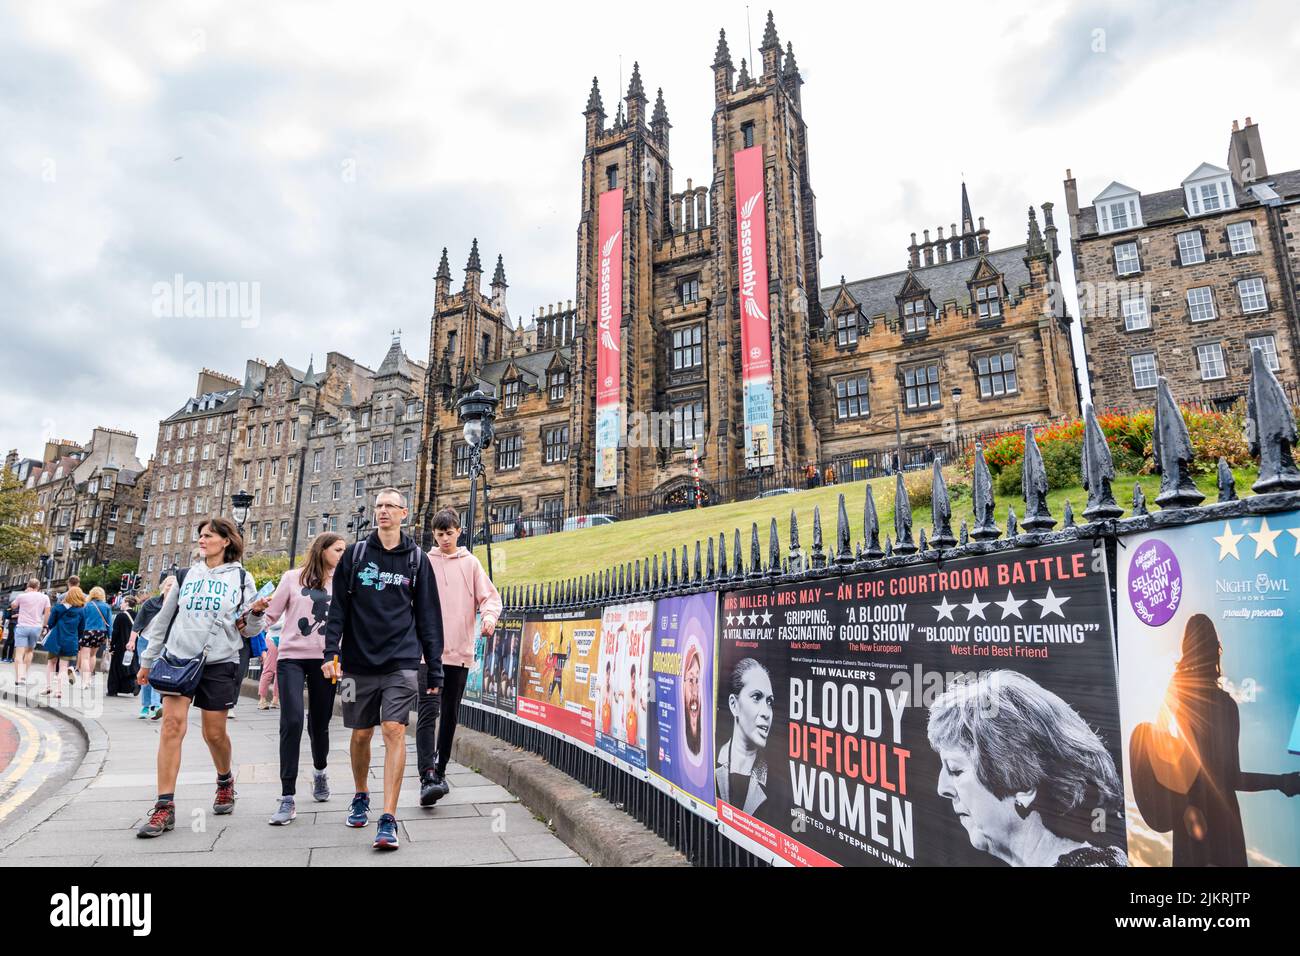 Edinburgh, Scotland, United Kingdom, 3rd August 2022. Edinburgh Festivals: Posters for the Edinburgh festival fringe shows in their usual place on the railings on The Mound Stock Photo